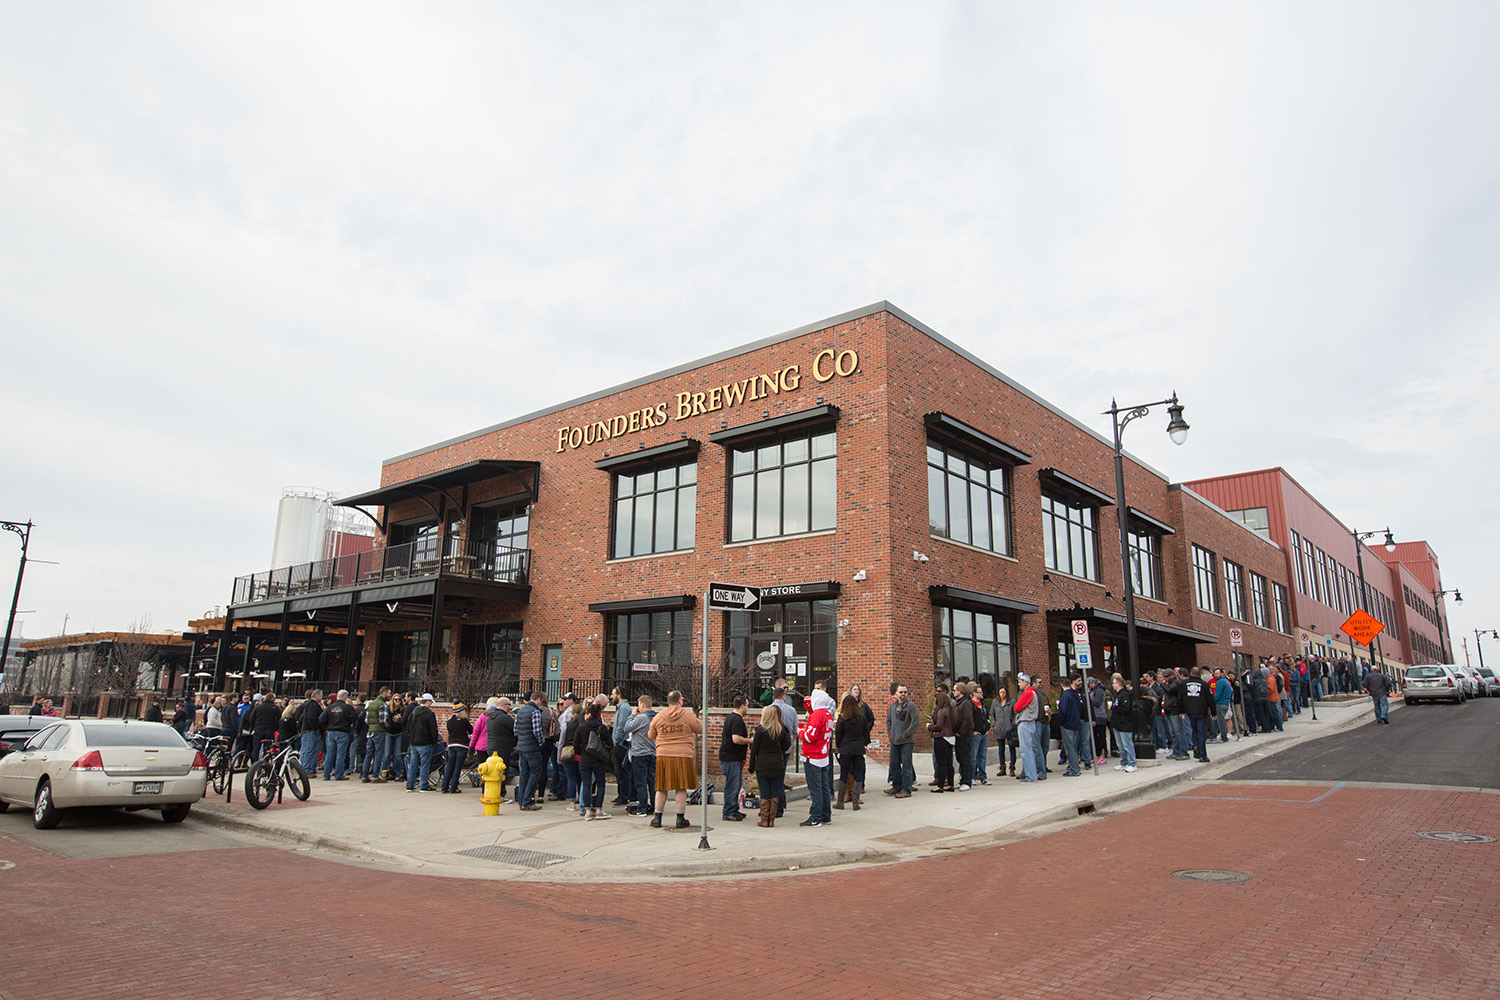 Lineup at Founders Brewing just for the KBS.